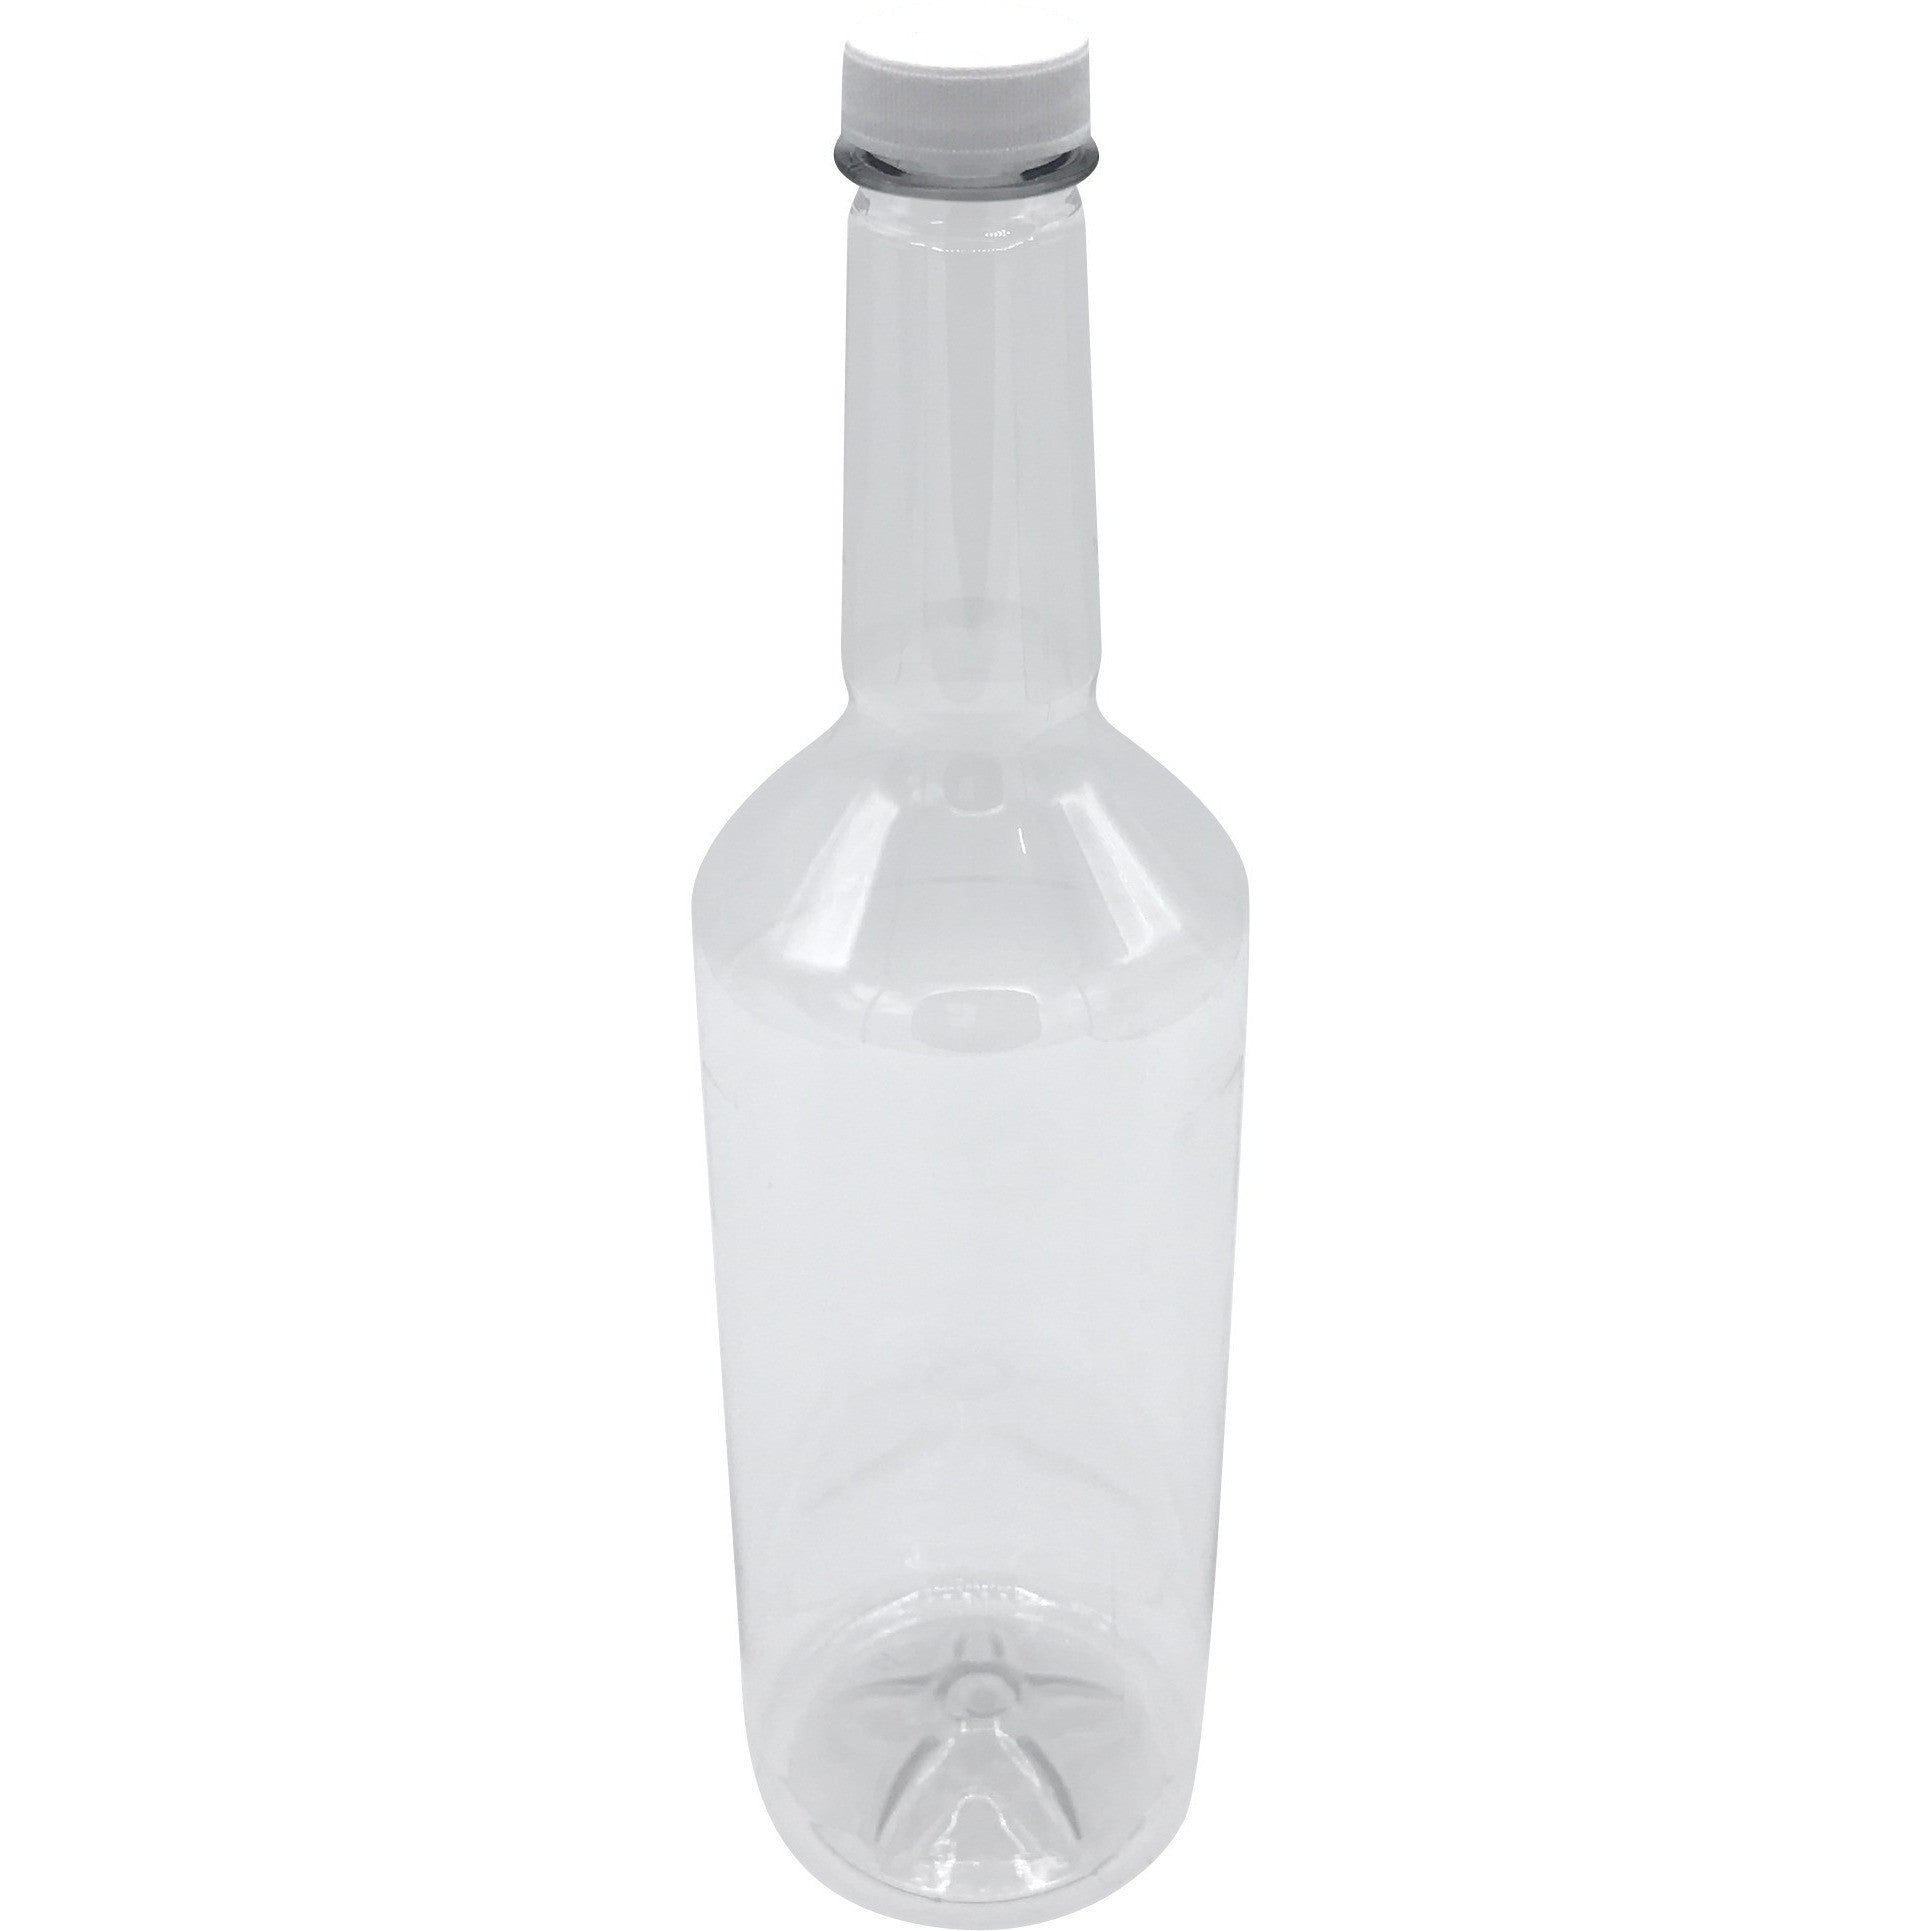 Pouring Bottle 32 Oz. with Cap - Icy-sky.com – IcySkyy